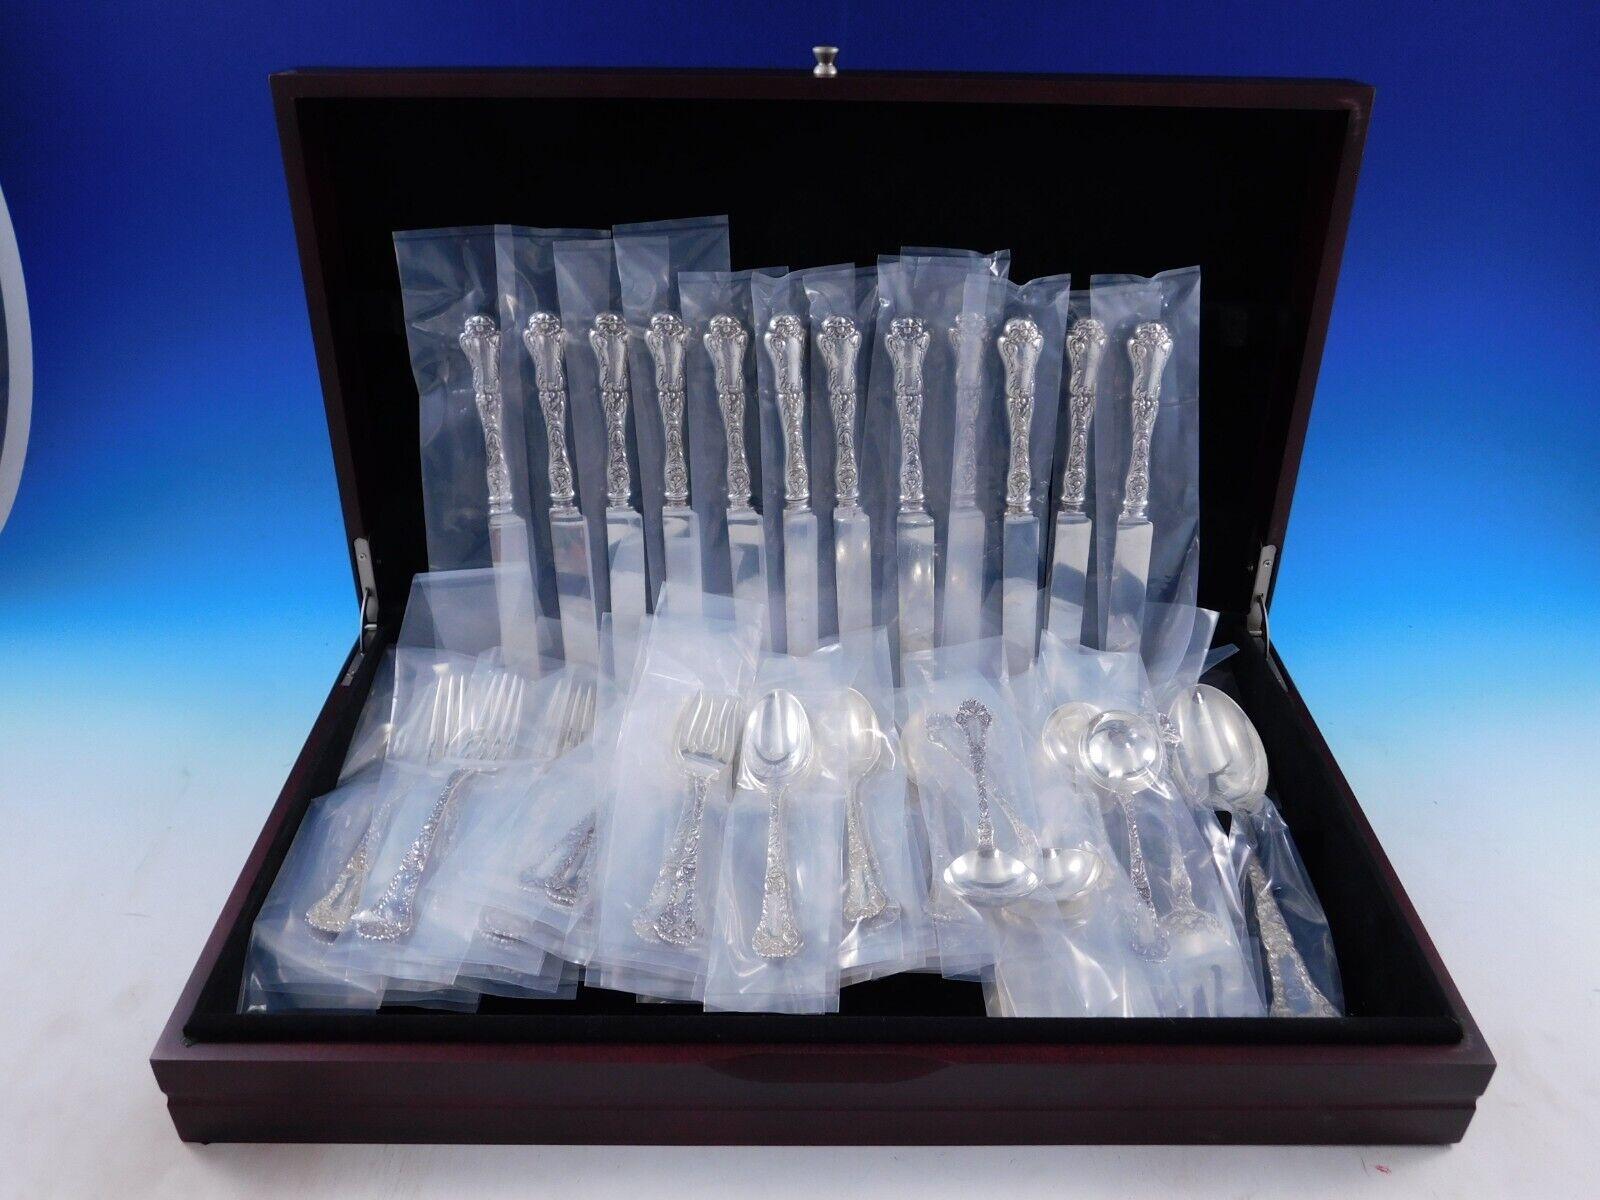 Poppy by Gorham Sterling Silver Flatware set - 62 pieces. This set includes:

12 Knives, 8 1/2